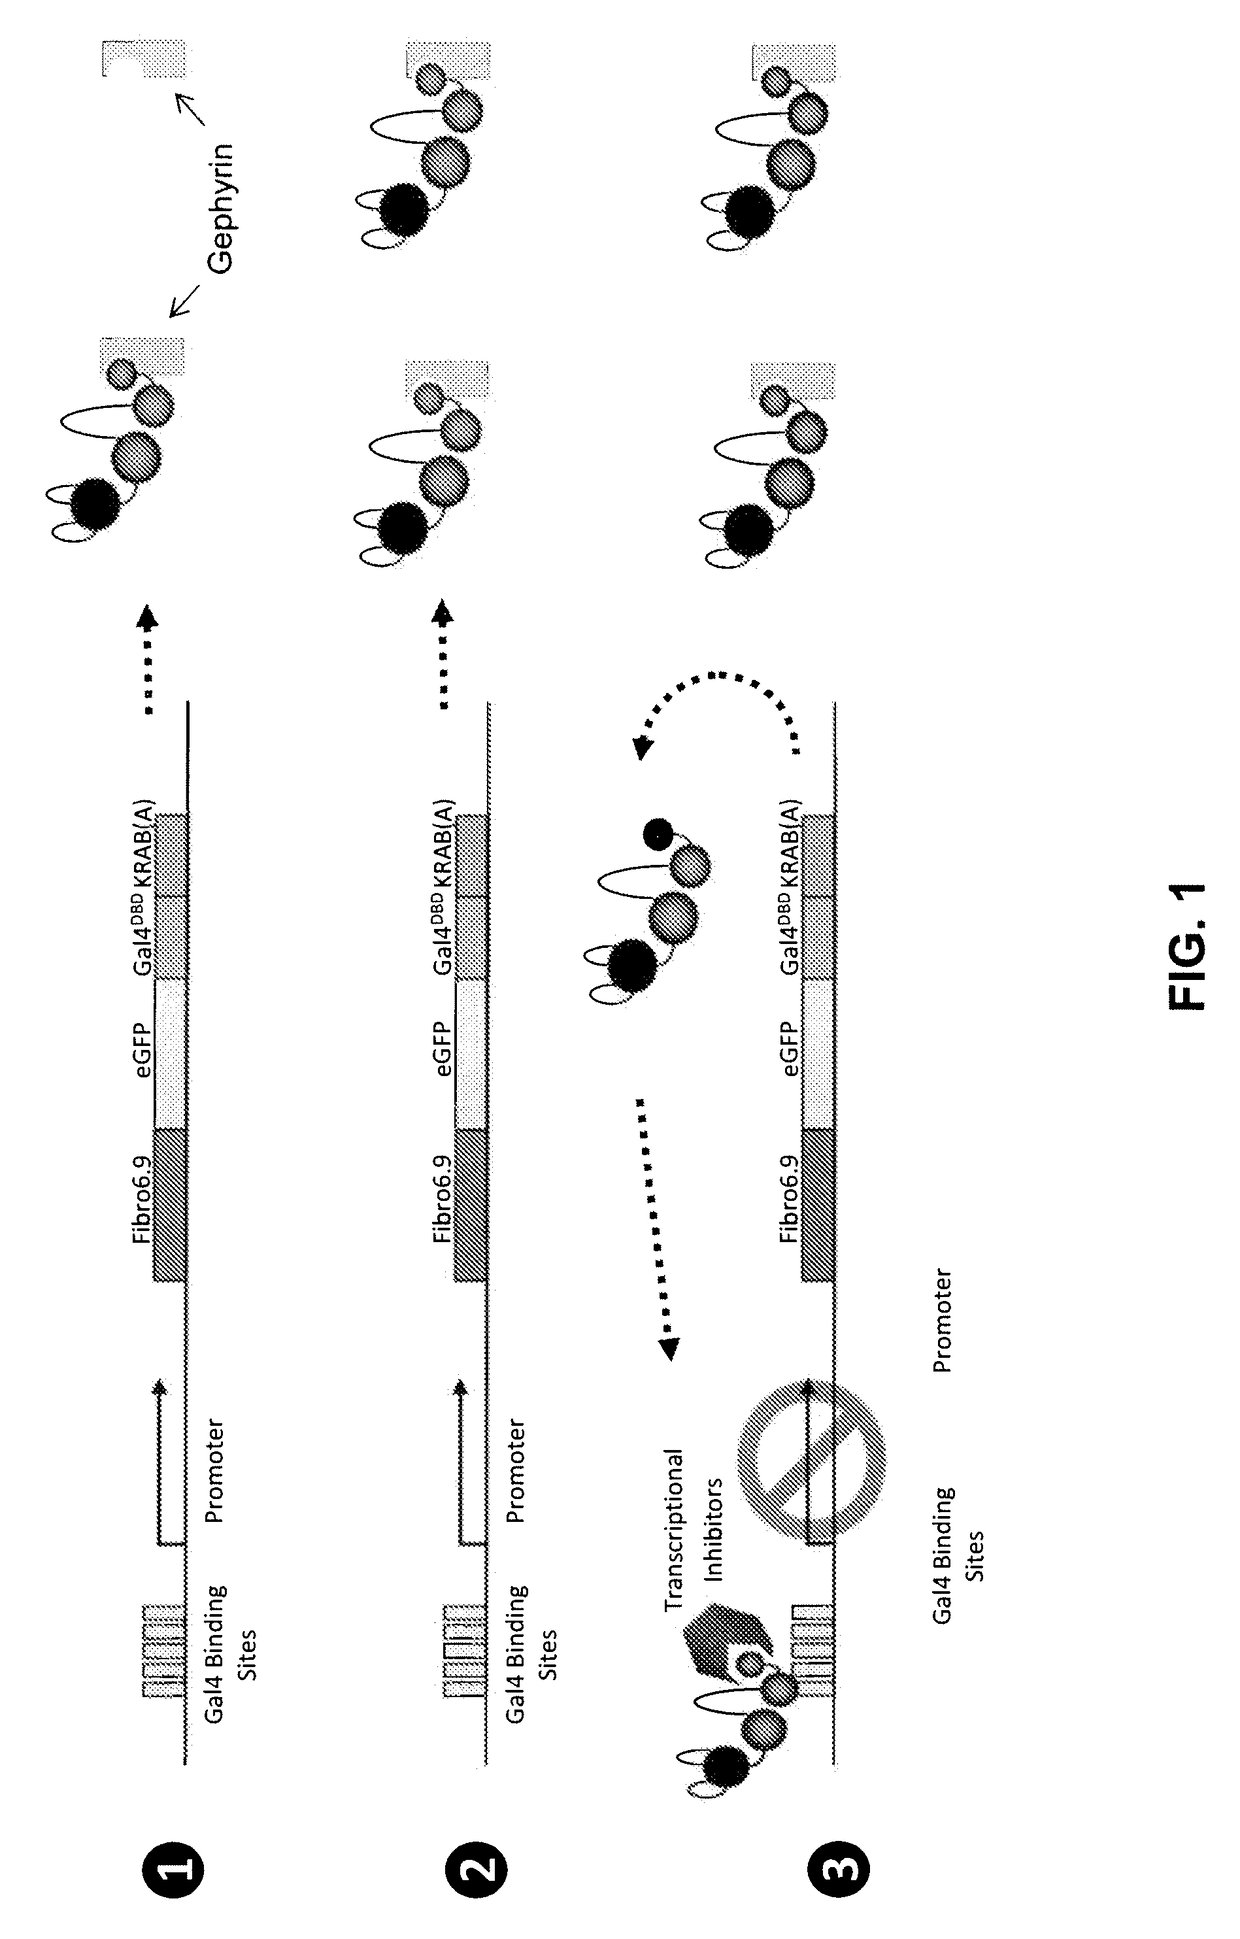 Antibody and antibody mimetic for visualization and ablation of endogenous proteins